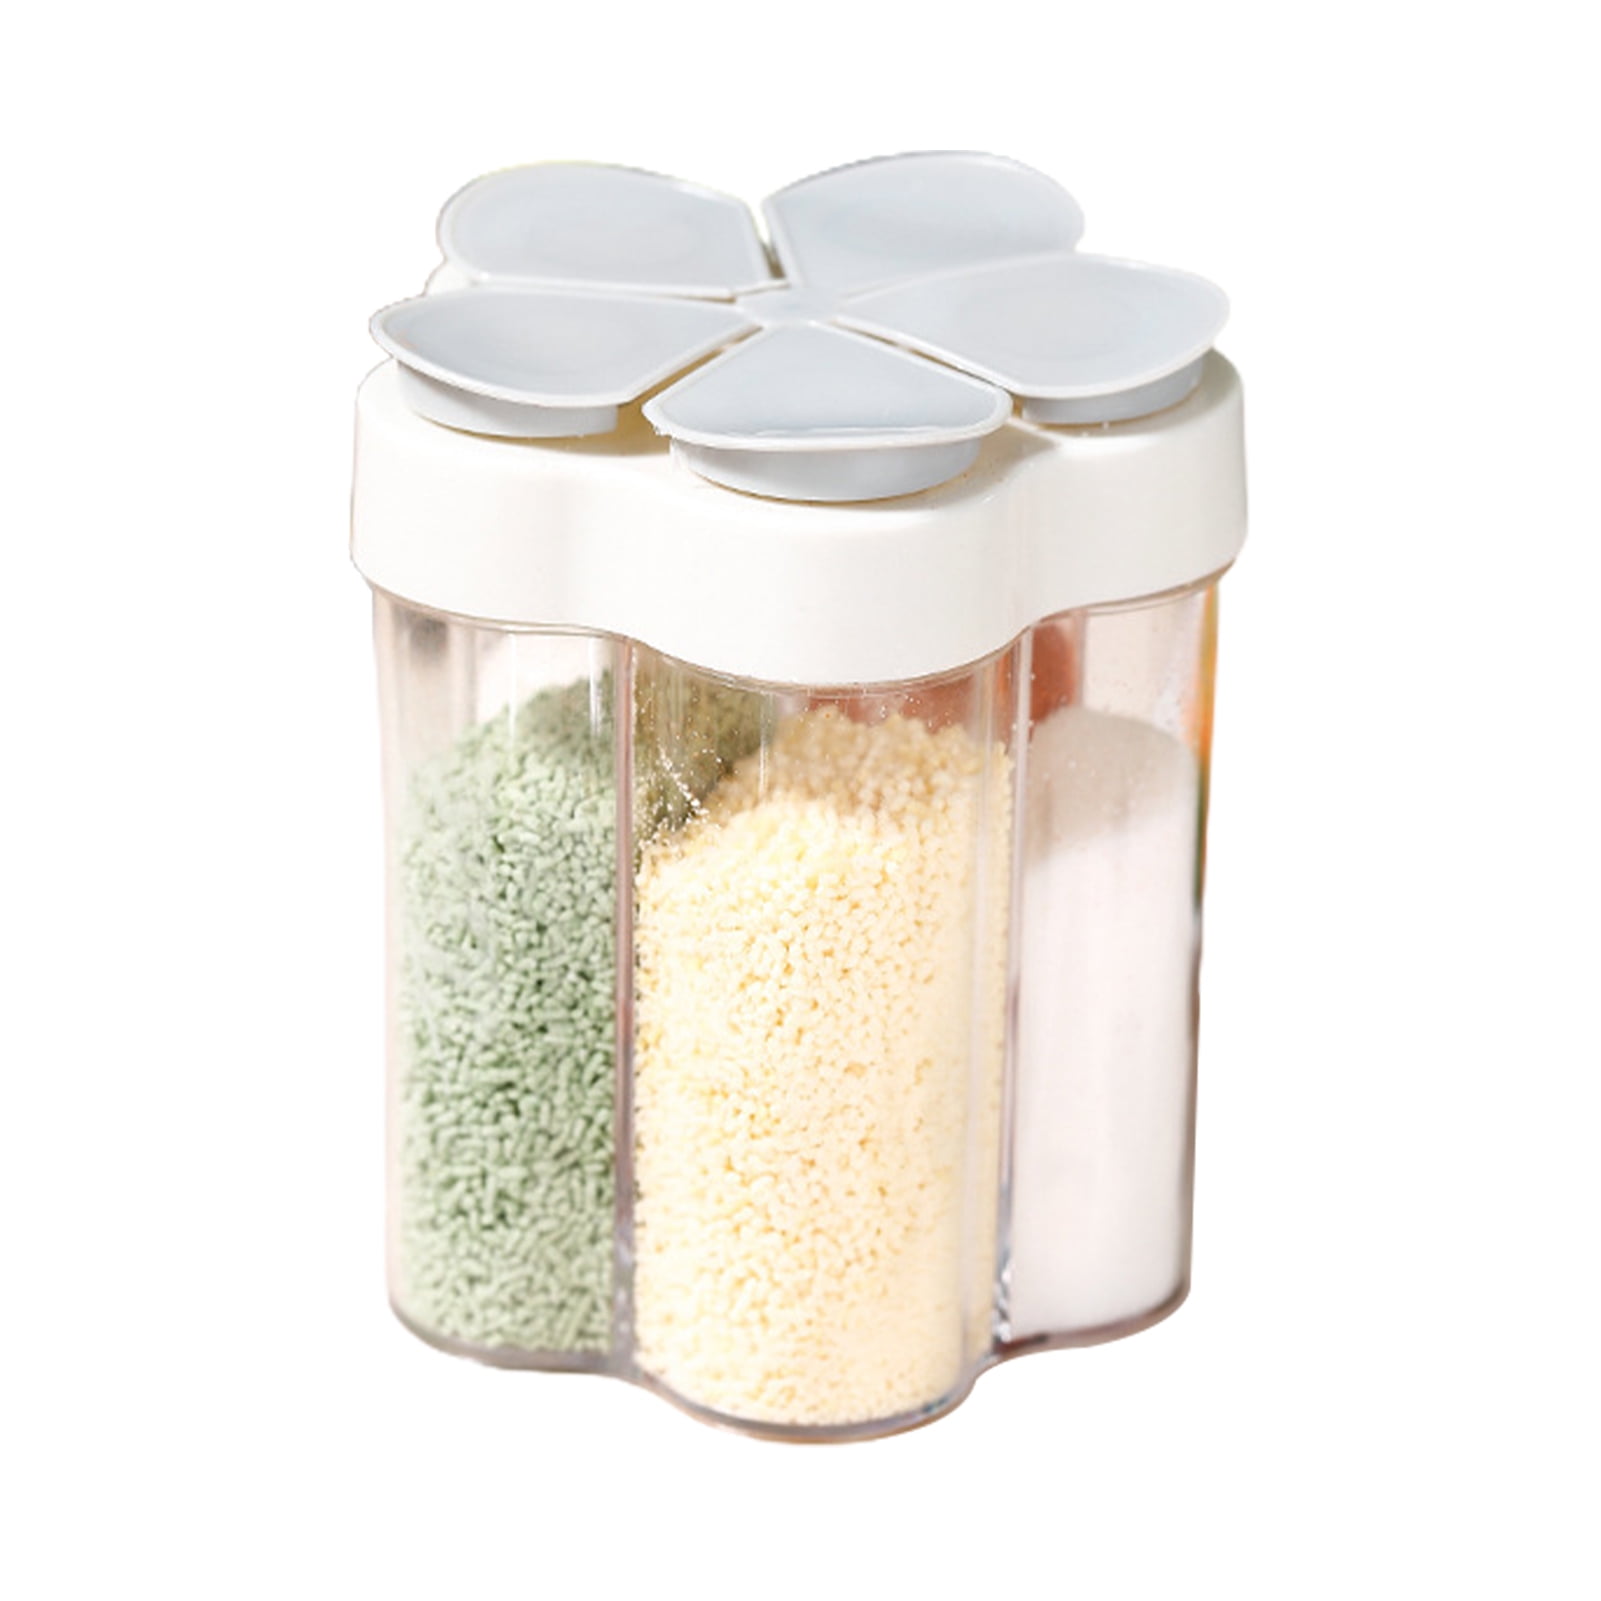 1pc 5-in-1 Travel Spice Container With Shaker, Labelled Clear